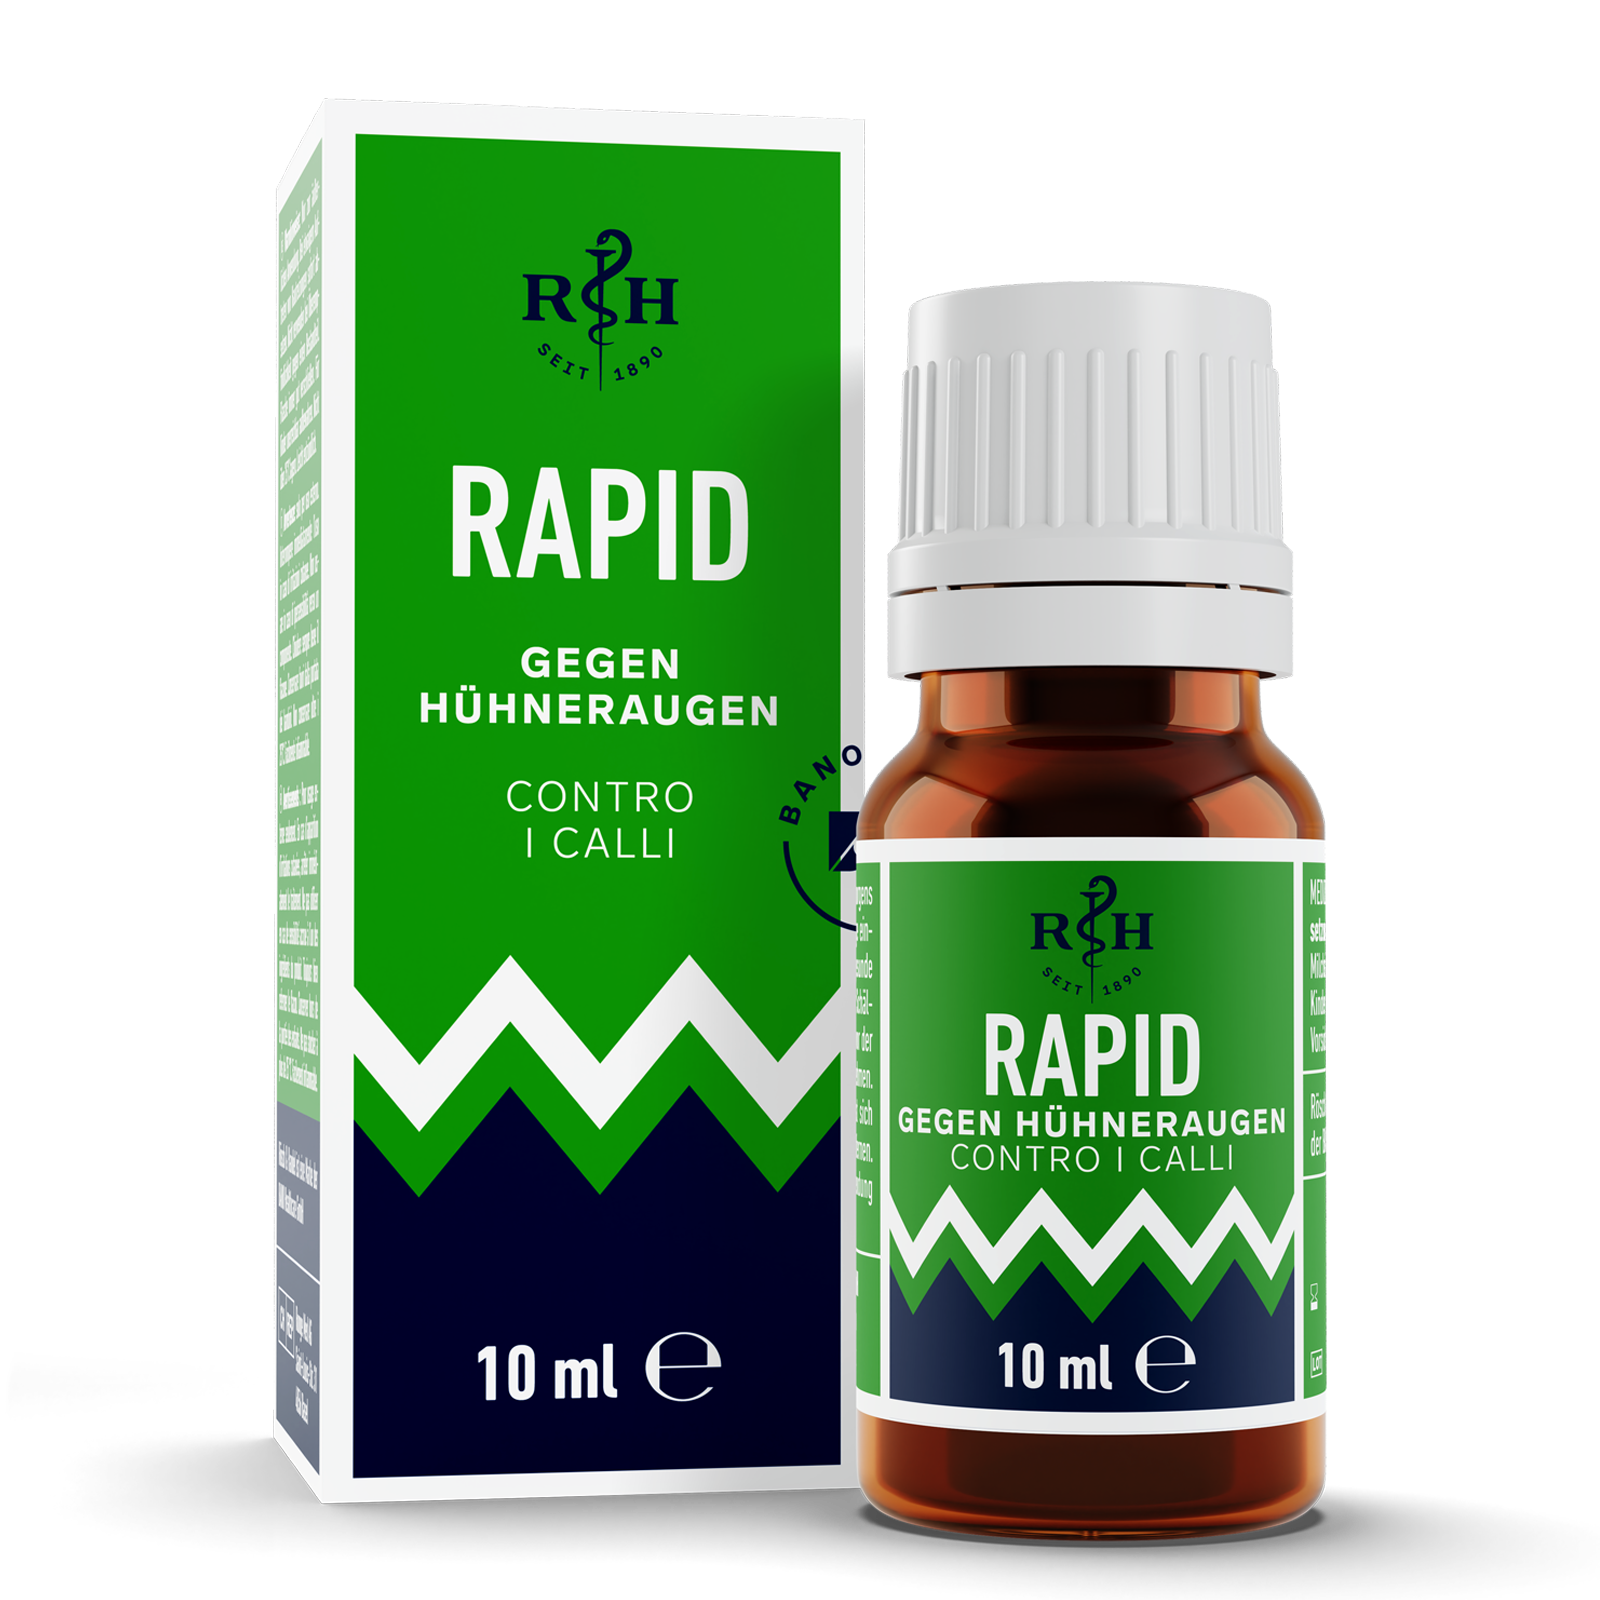 Rapid for the removal of corns